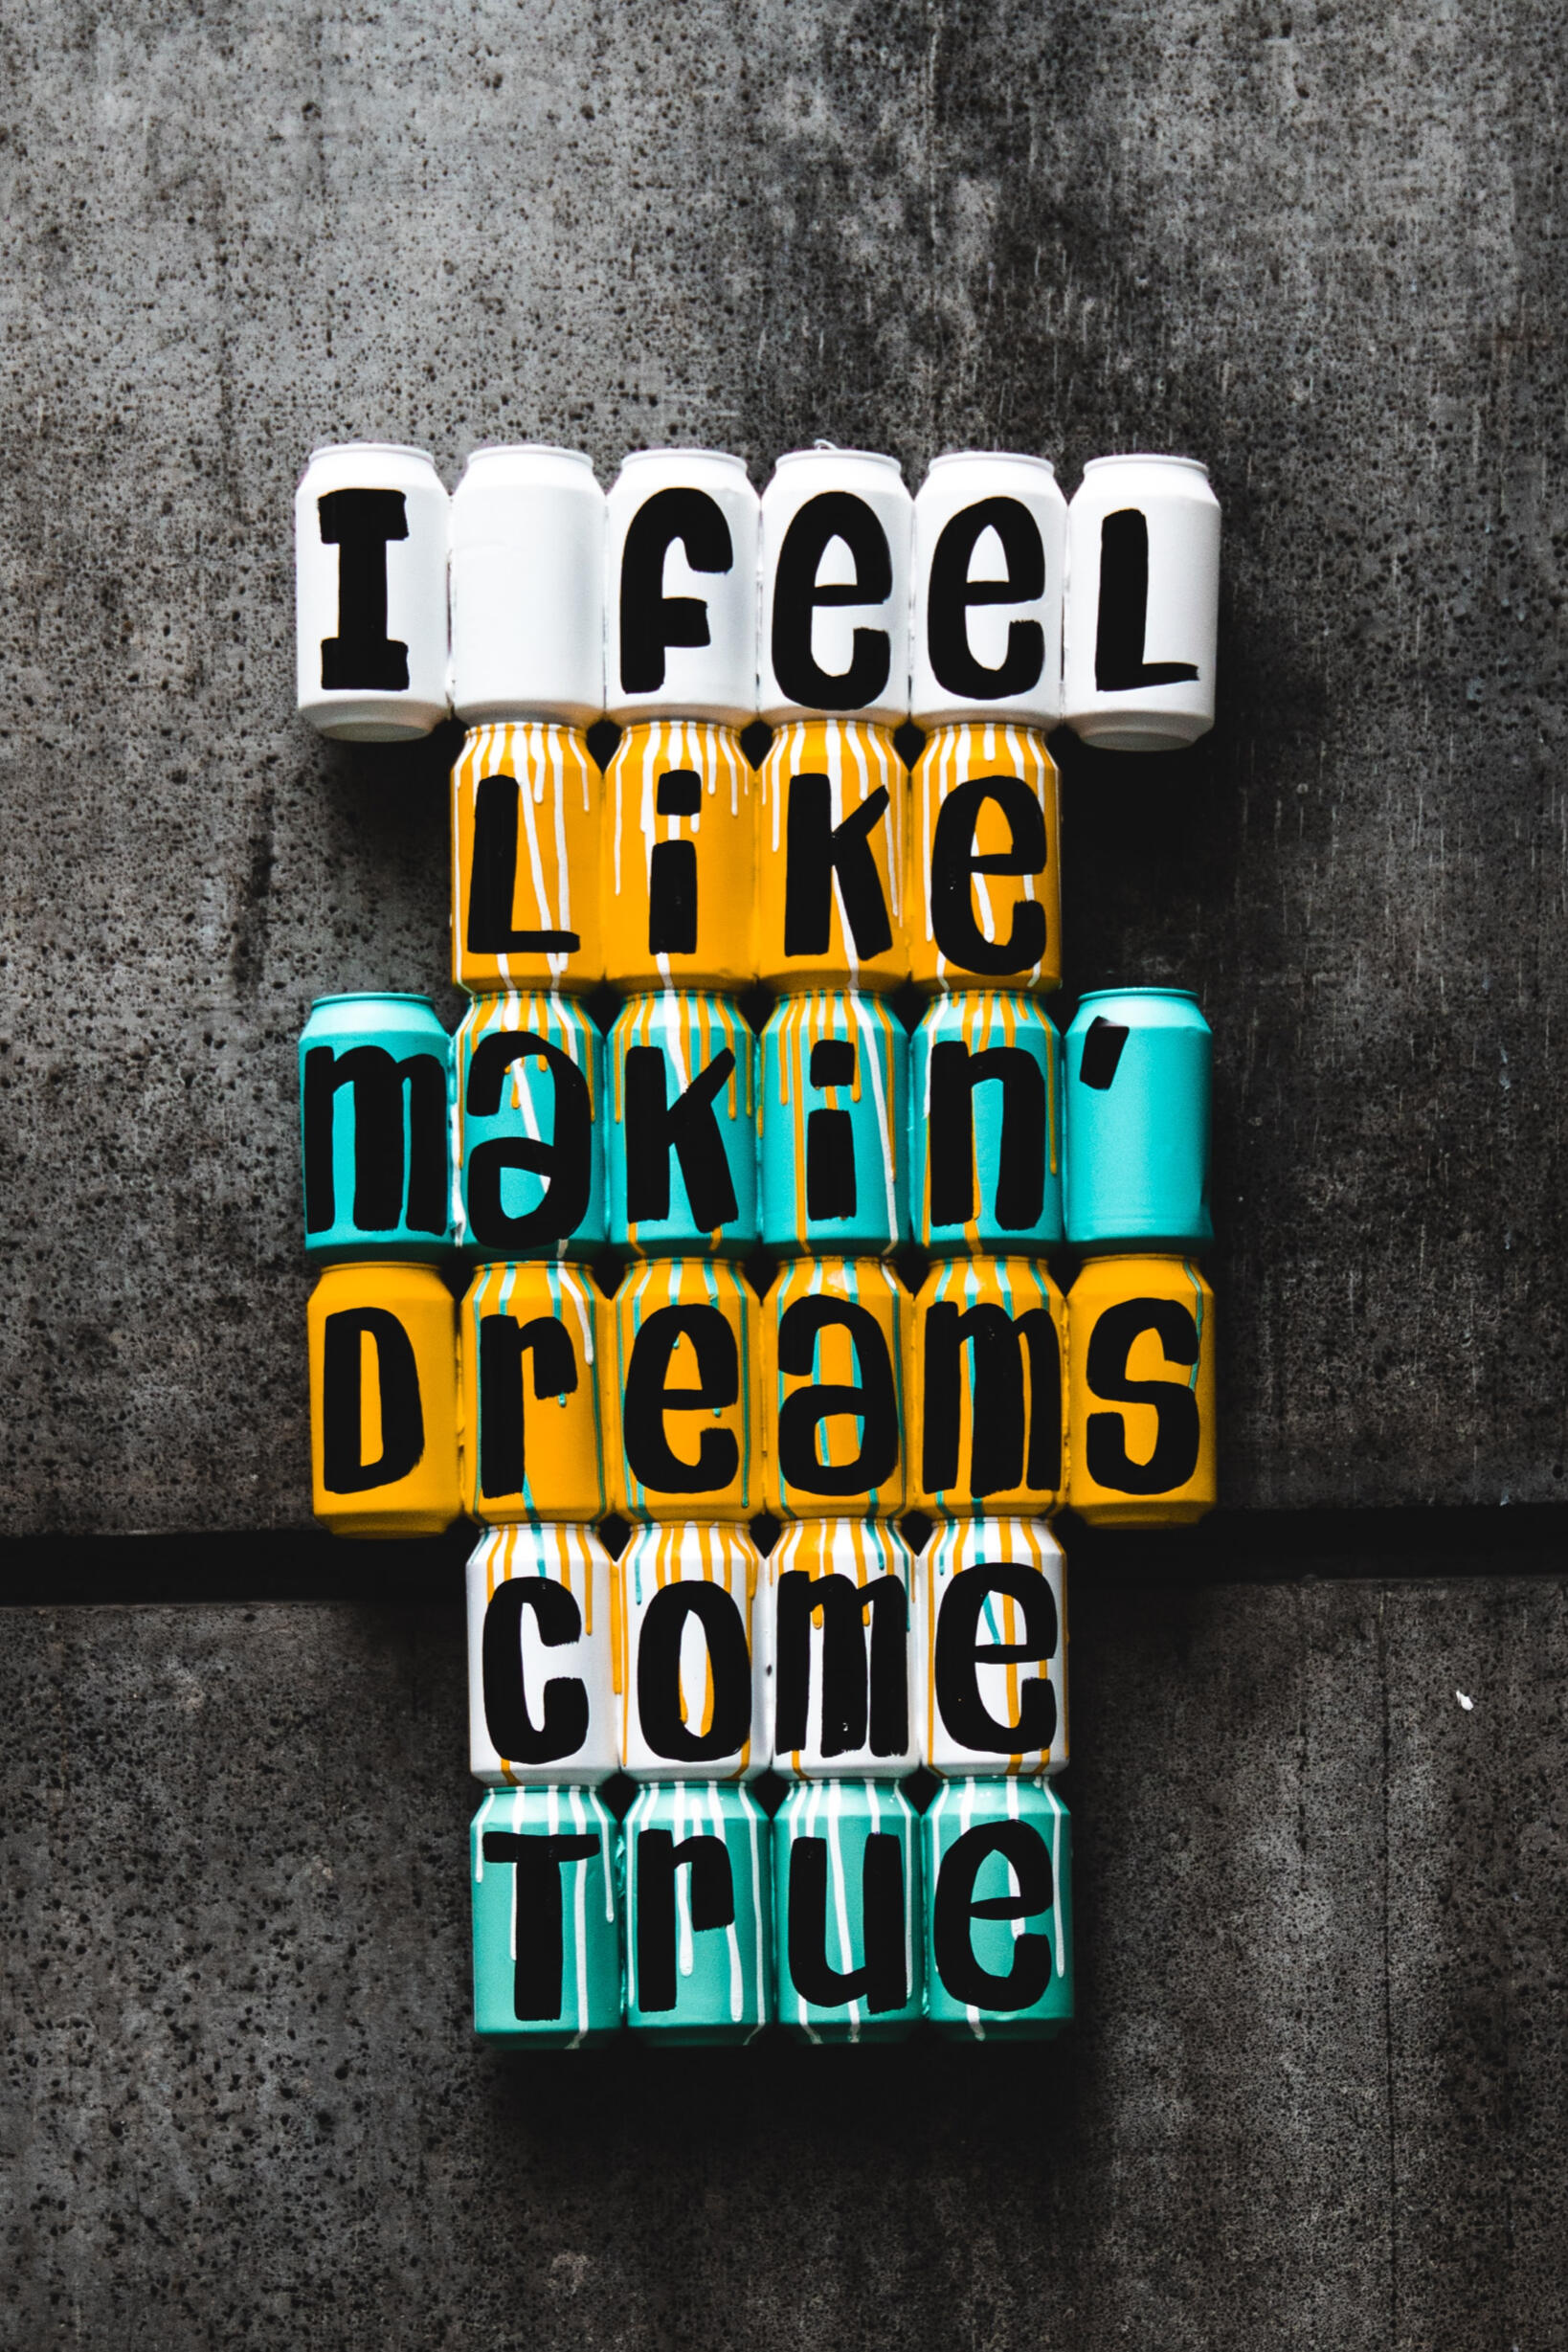 Painted tins spelling out the words "I feel like making dreams come true"